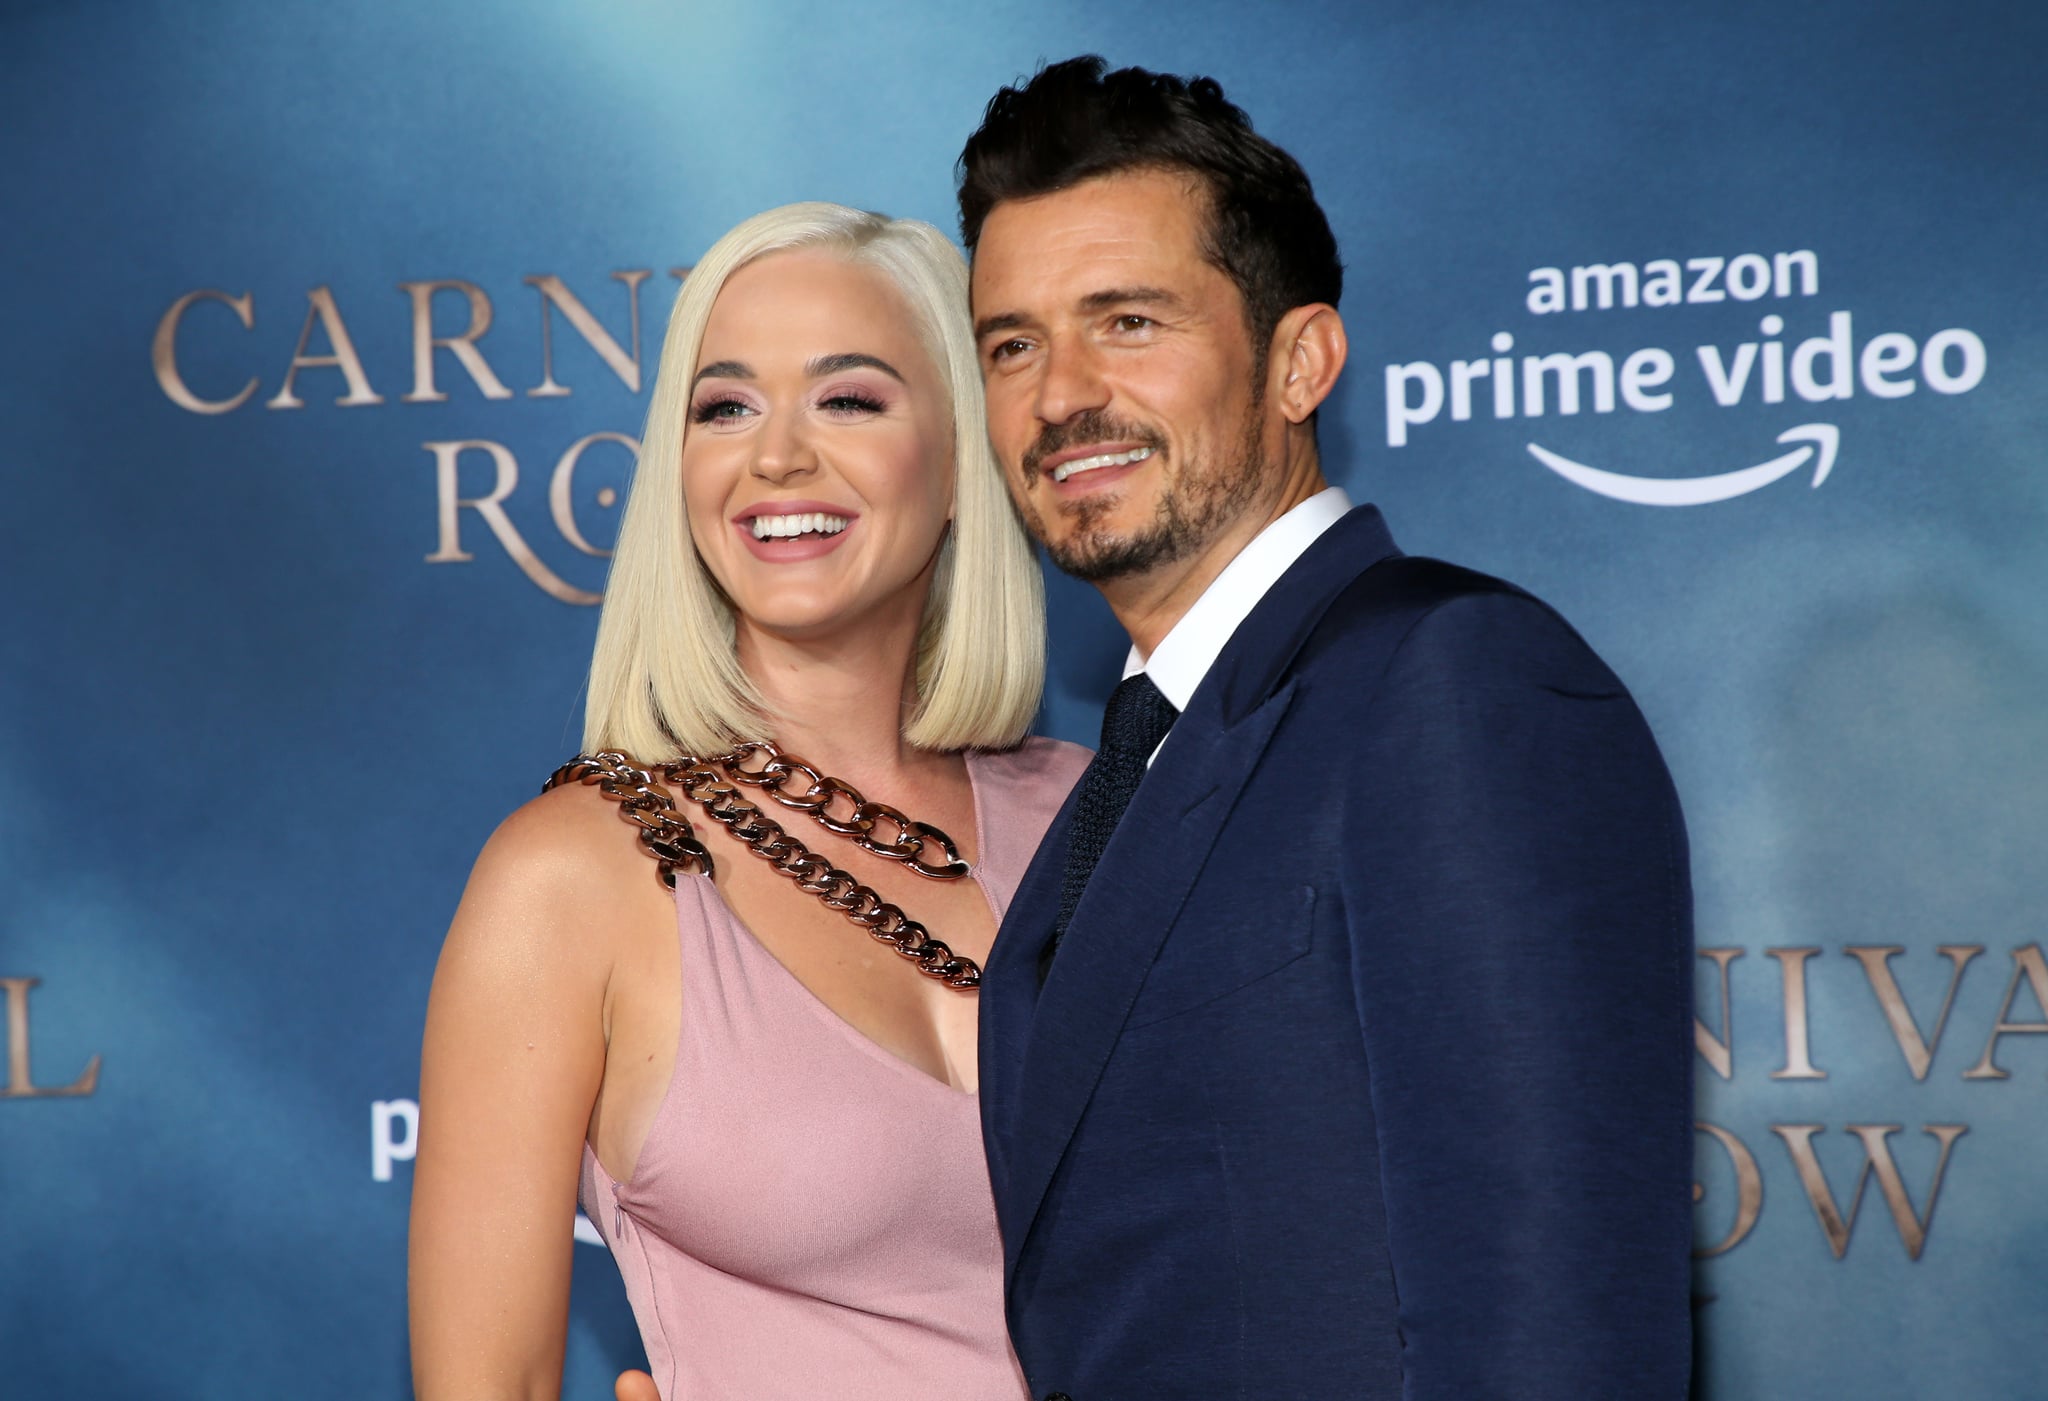 HOLLYWOOD, CALIFORNIA - AUGUST 21: Katy Perry and Orlando Bloom attend the LA premiere of Amazon's